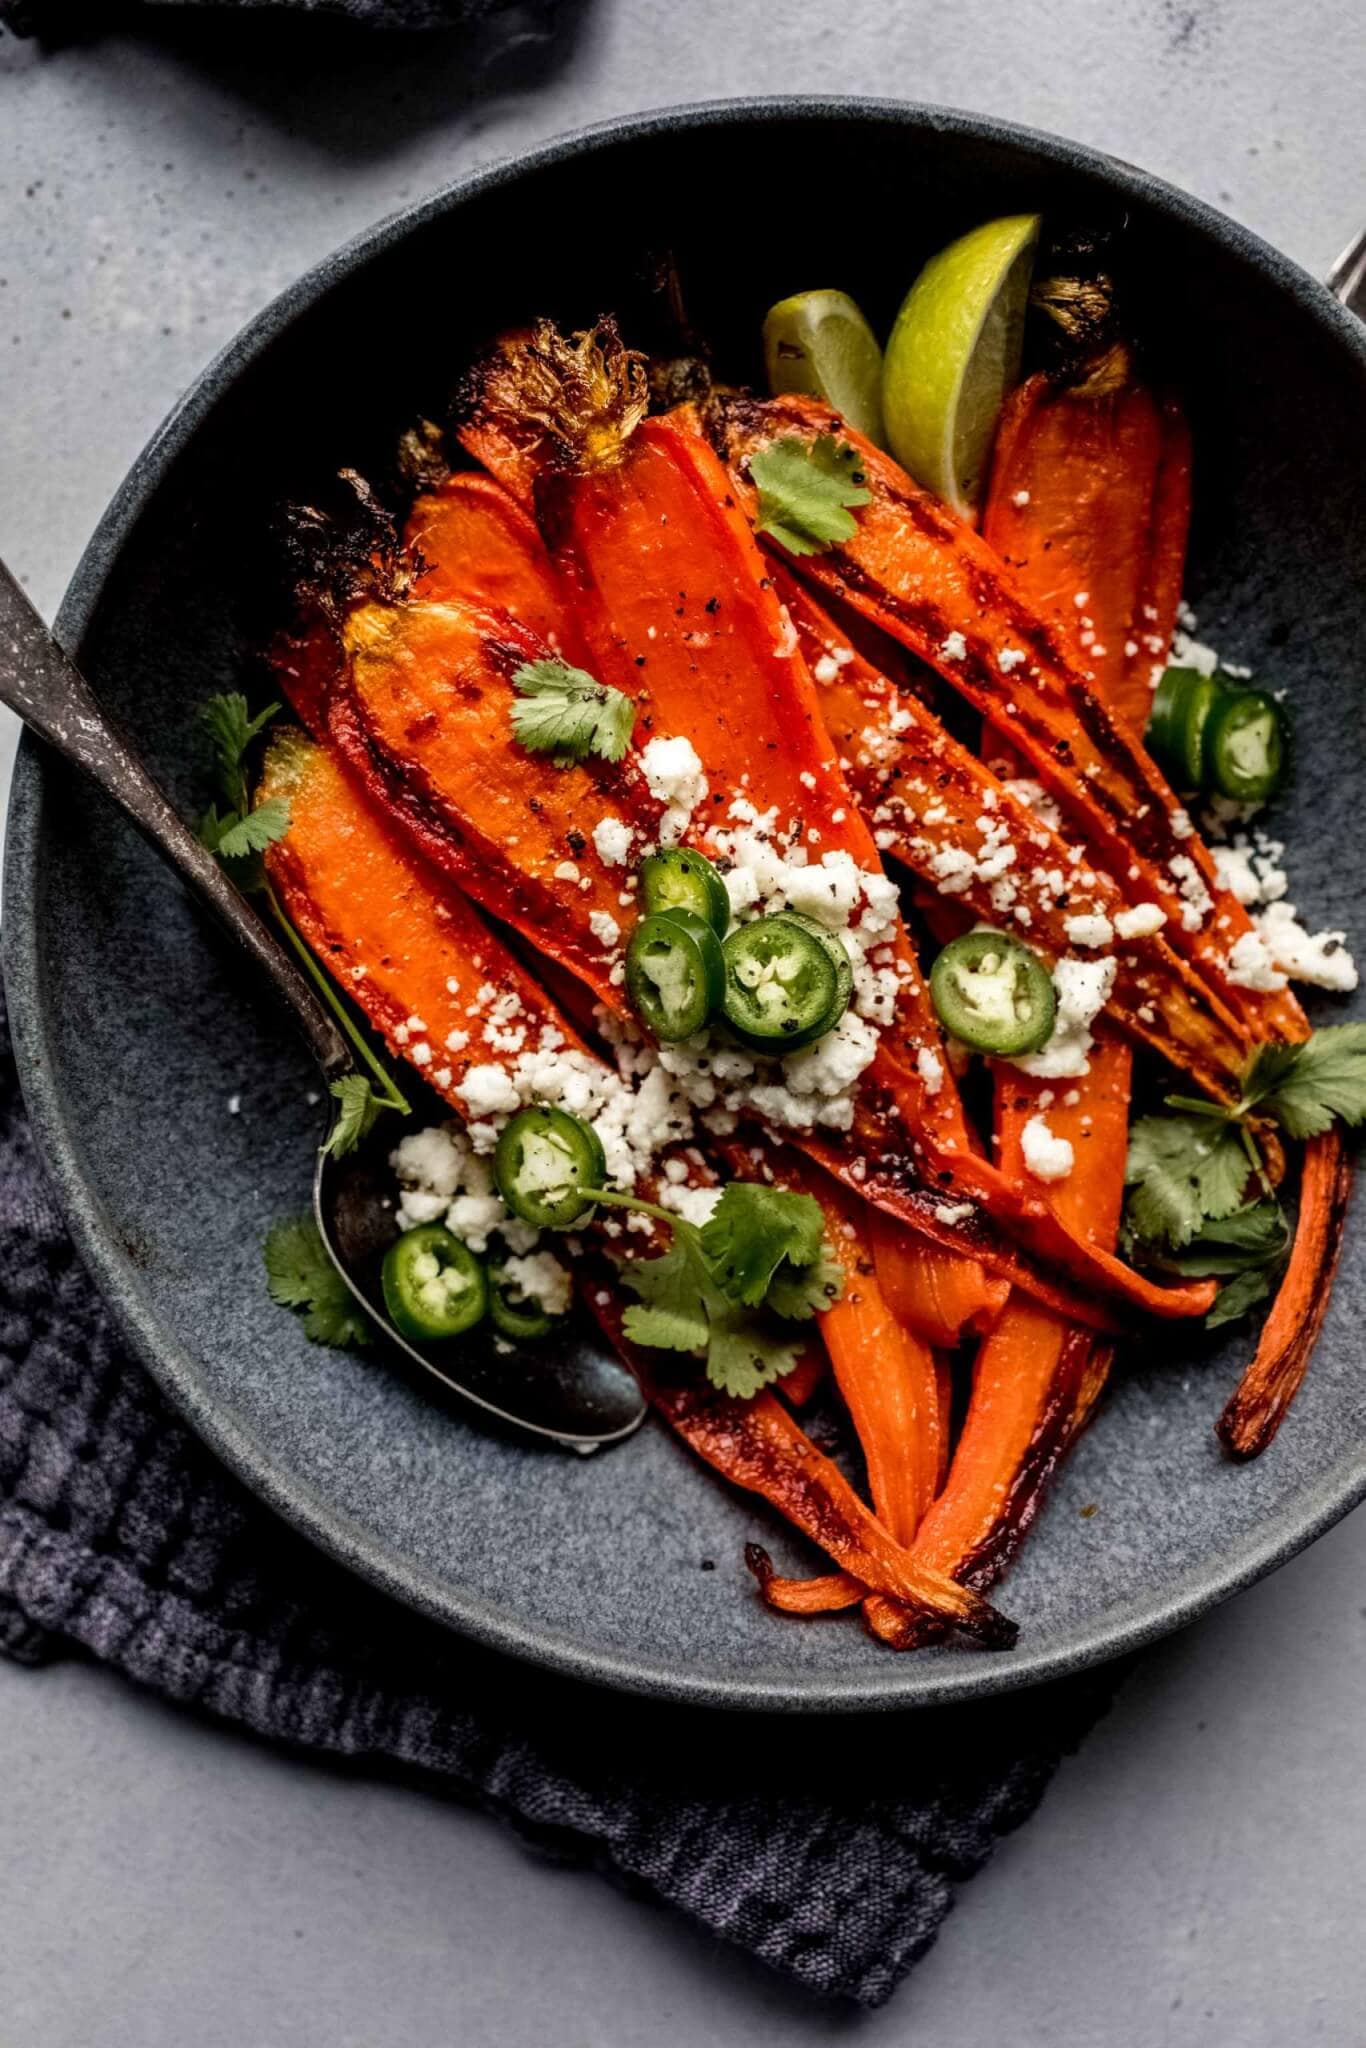 Roasted carrots in bowl with spoon.